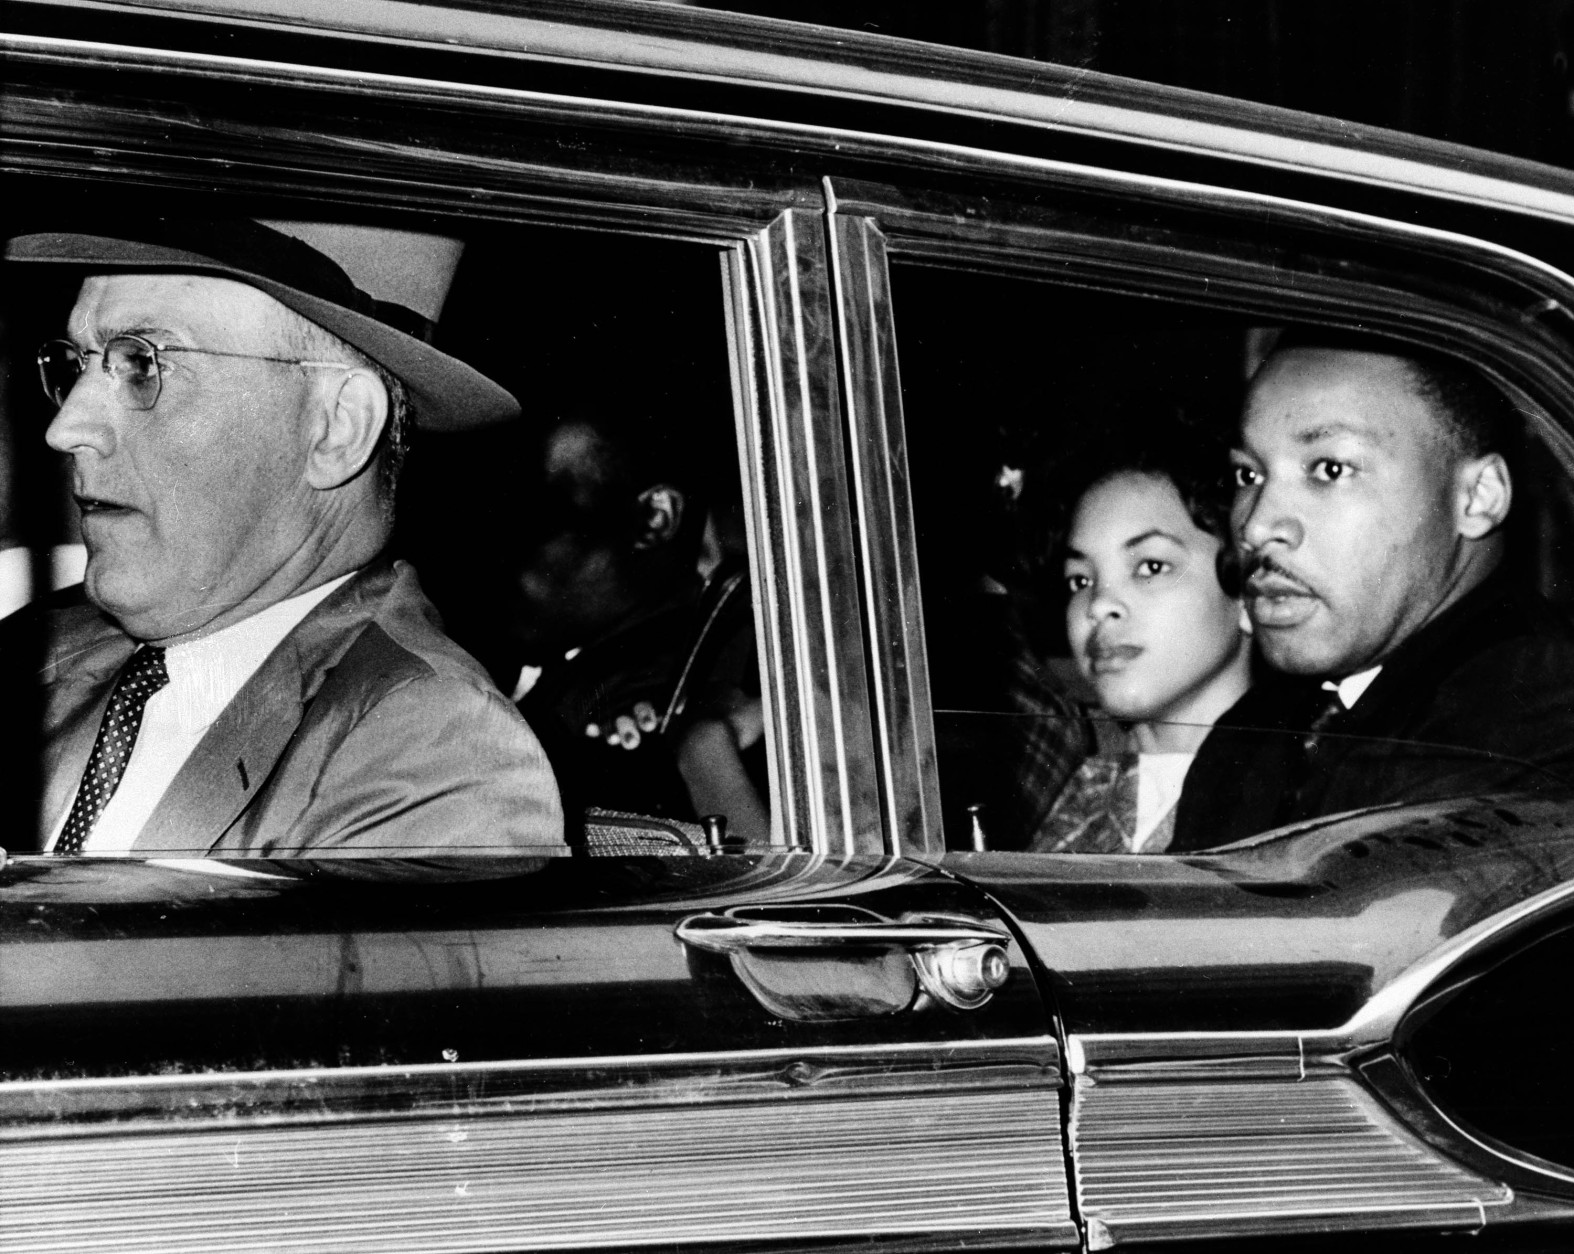 Dr. Martin Luther King Jr., right, looks out the window of a police car as he and other sit-in demonstrators are taken to jail, Oct. 19, 1960. Driver the car is Atlanta Police Capt. R.E. Little. King was among 52 blacks arrested following demonstrations at several department and variety stores protesting lunch counter segregation. (AP Photo)